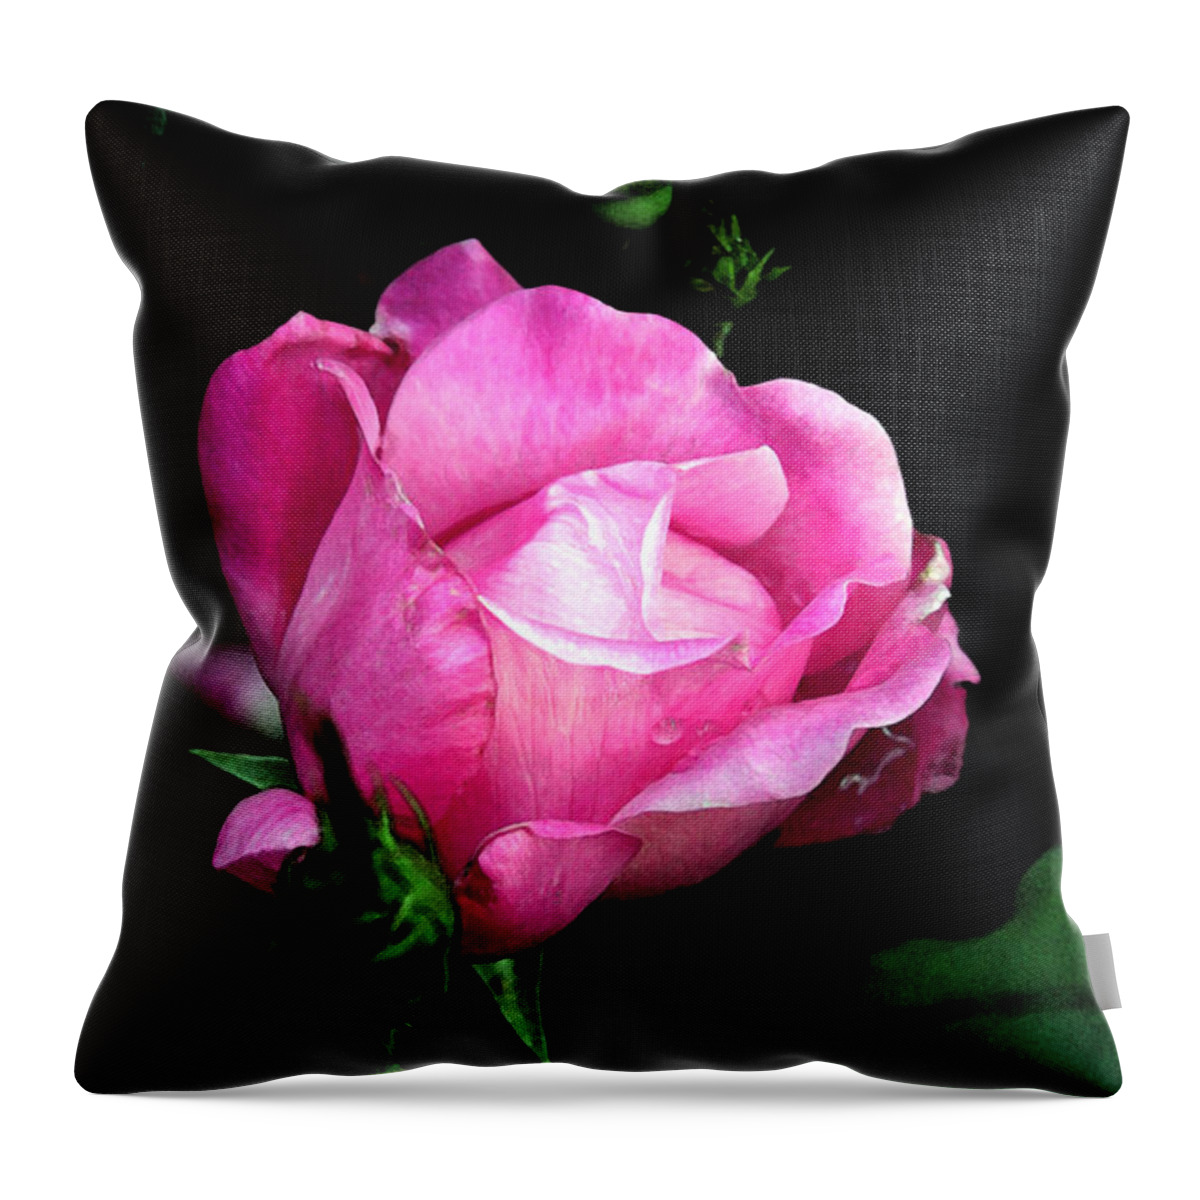 Rose Throw Pillow featuring the photograph Regal Rose by Karen Harrison Brown